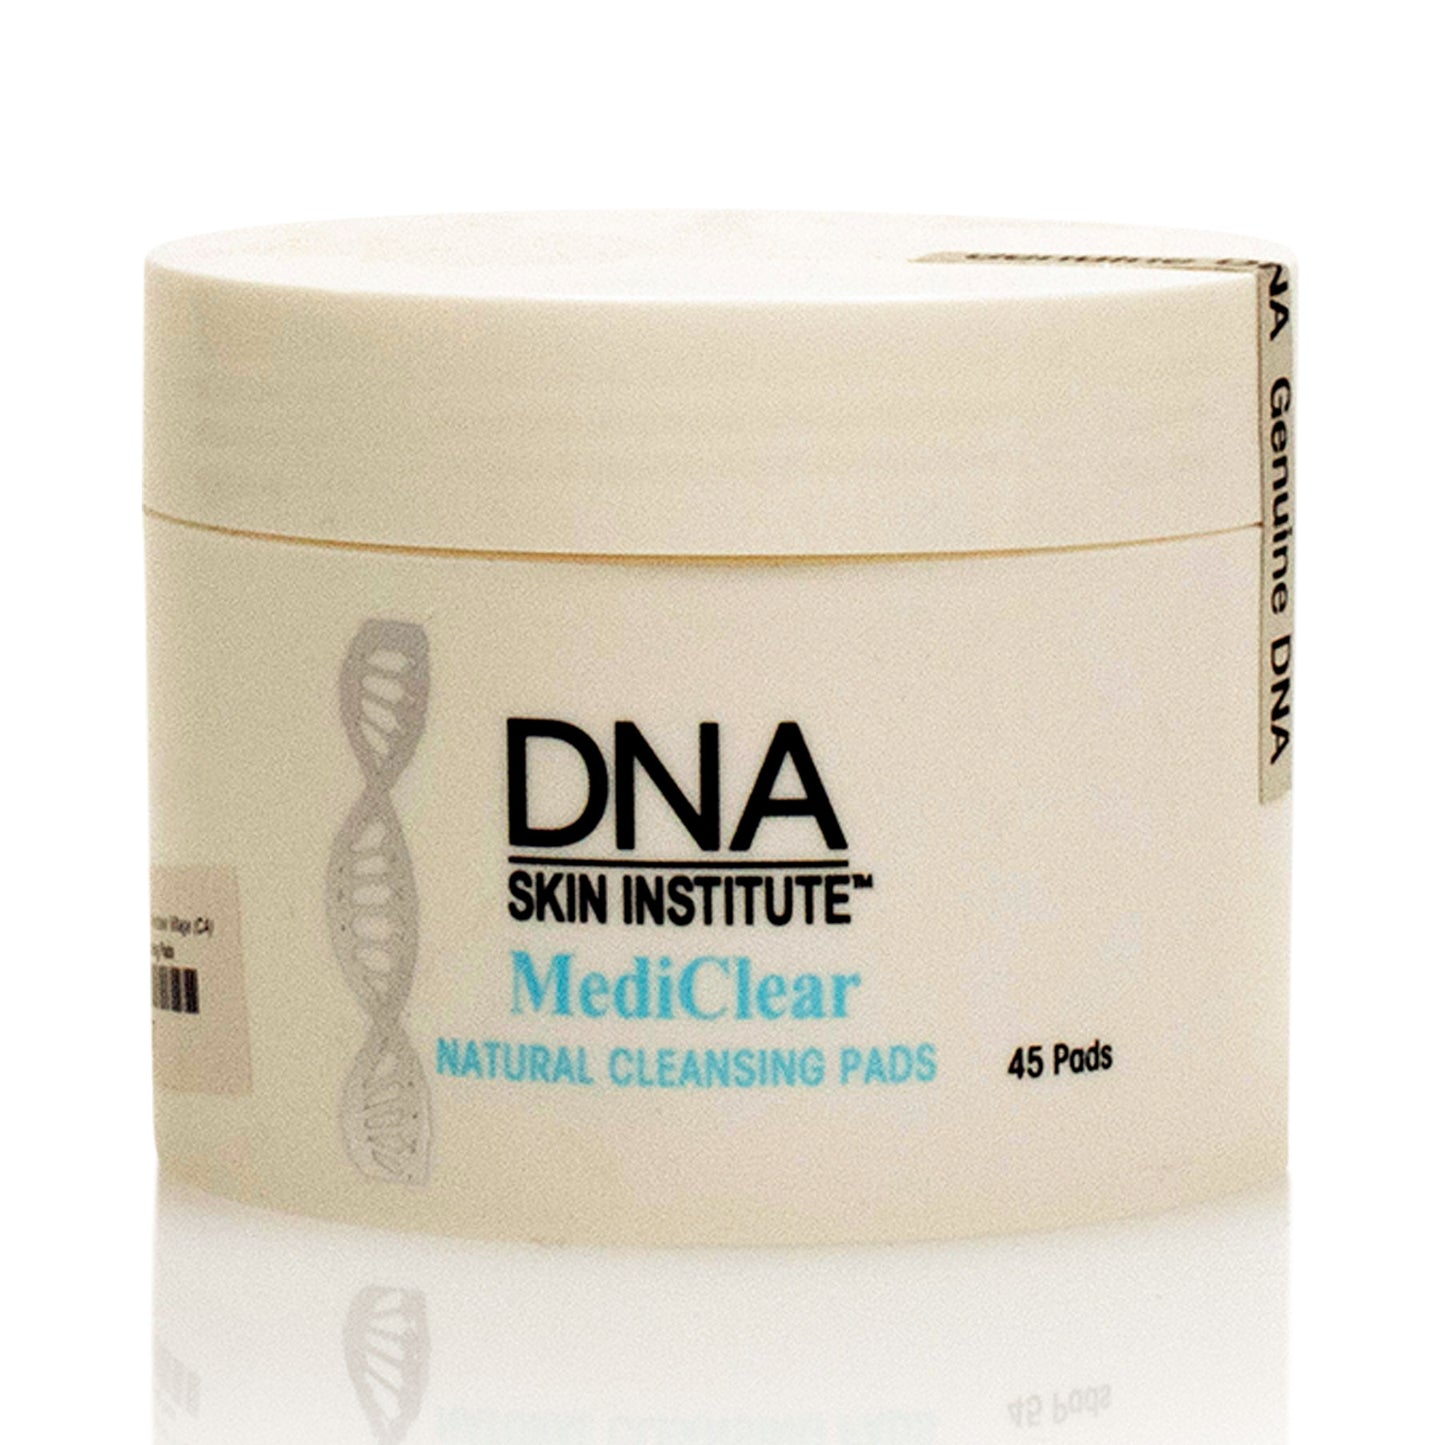 DNA MEDI-CLEAR NATURAL CLEANSING PADS